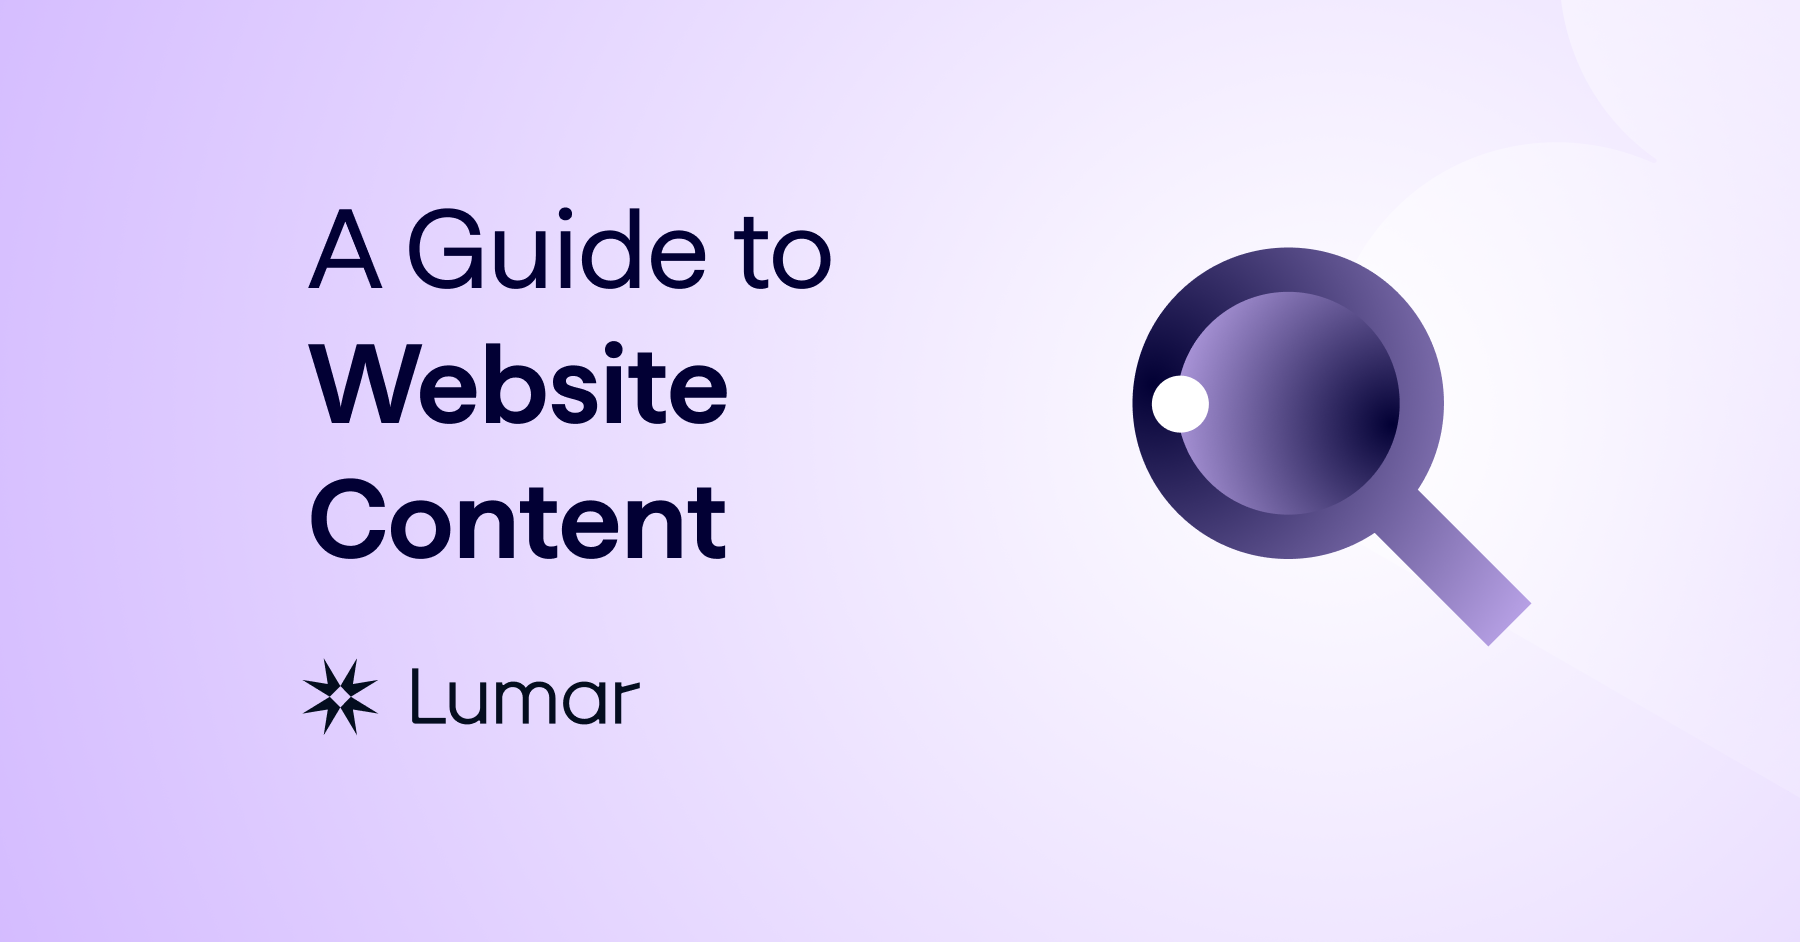 seo guide to optimizing page content for search engines